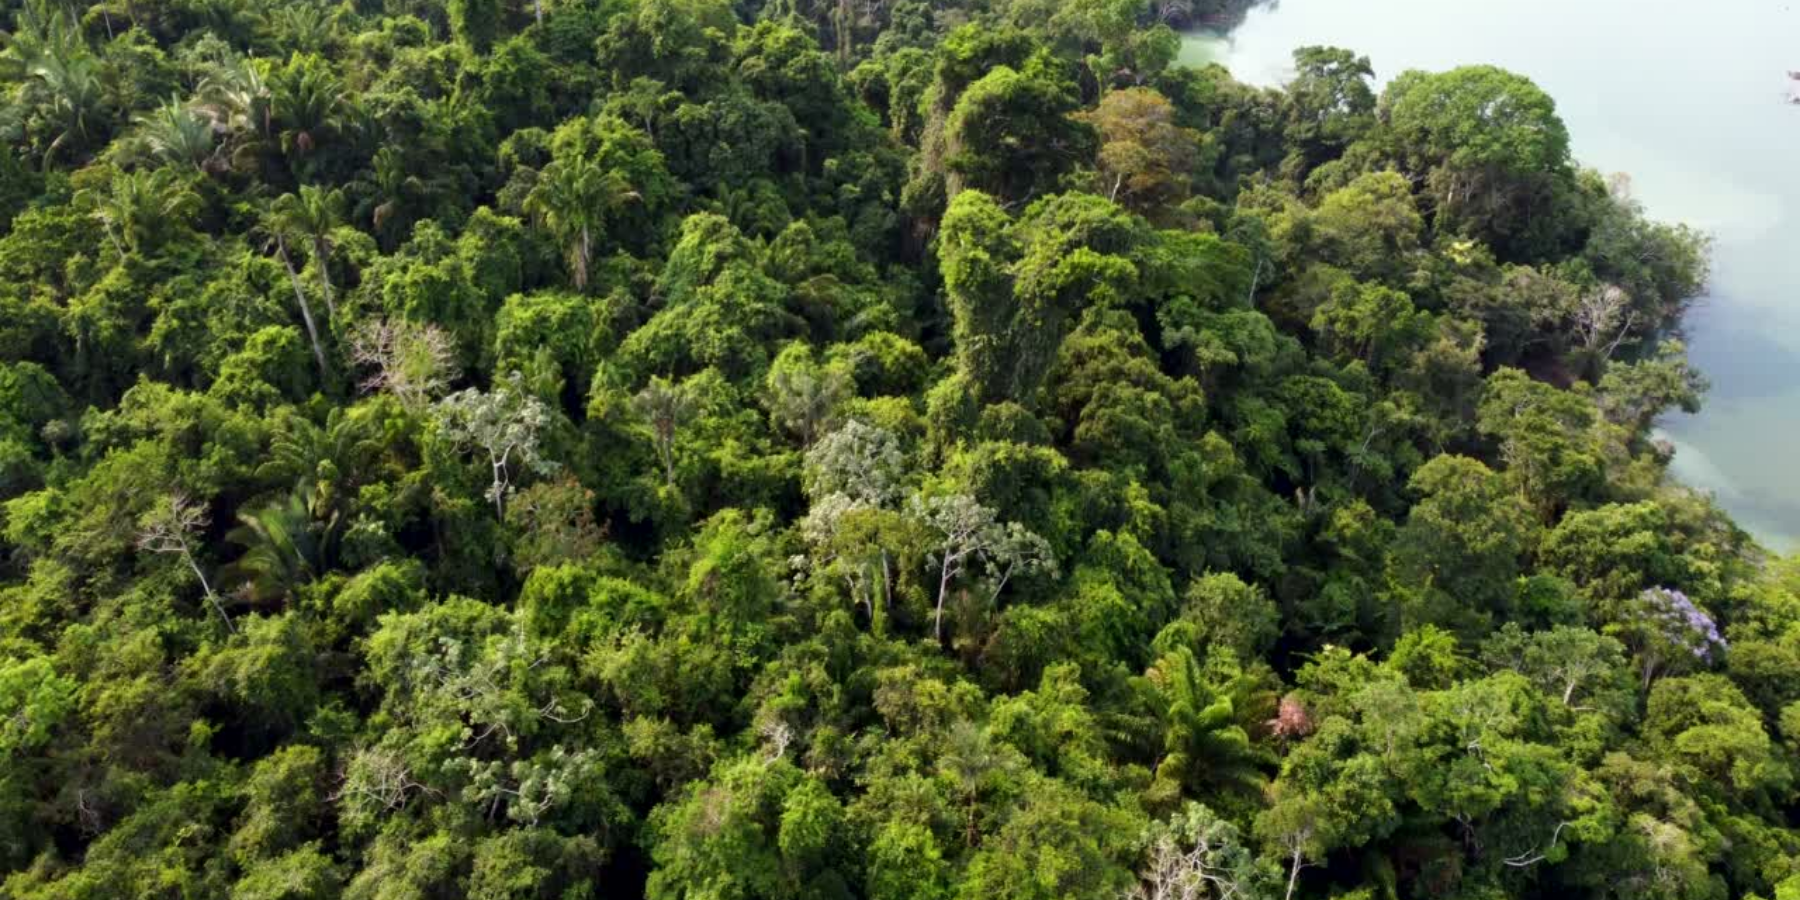 An aerial shot of the green rainforest canopy